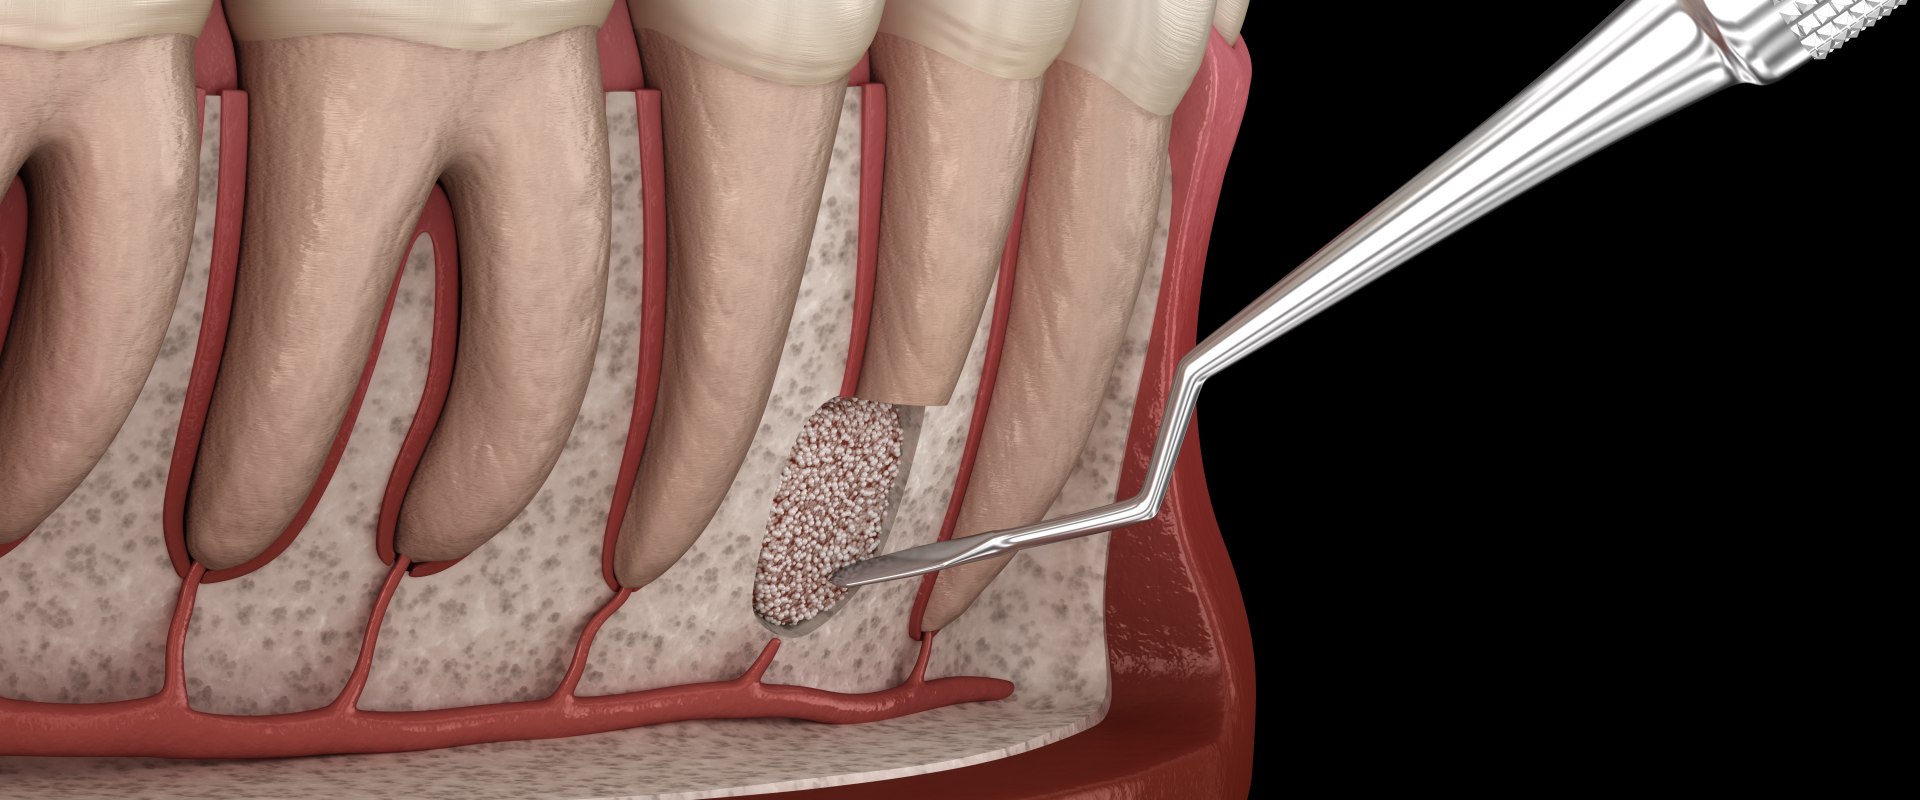 What is the Most Common Periodontal Surgery?